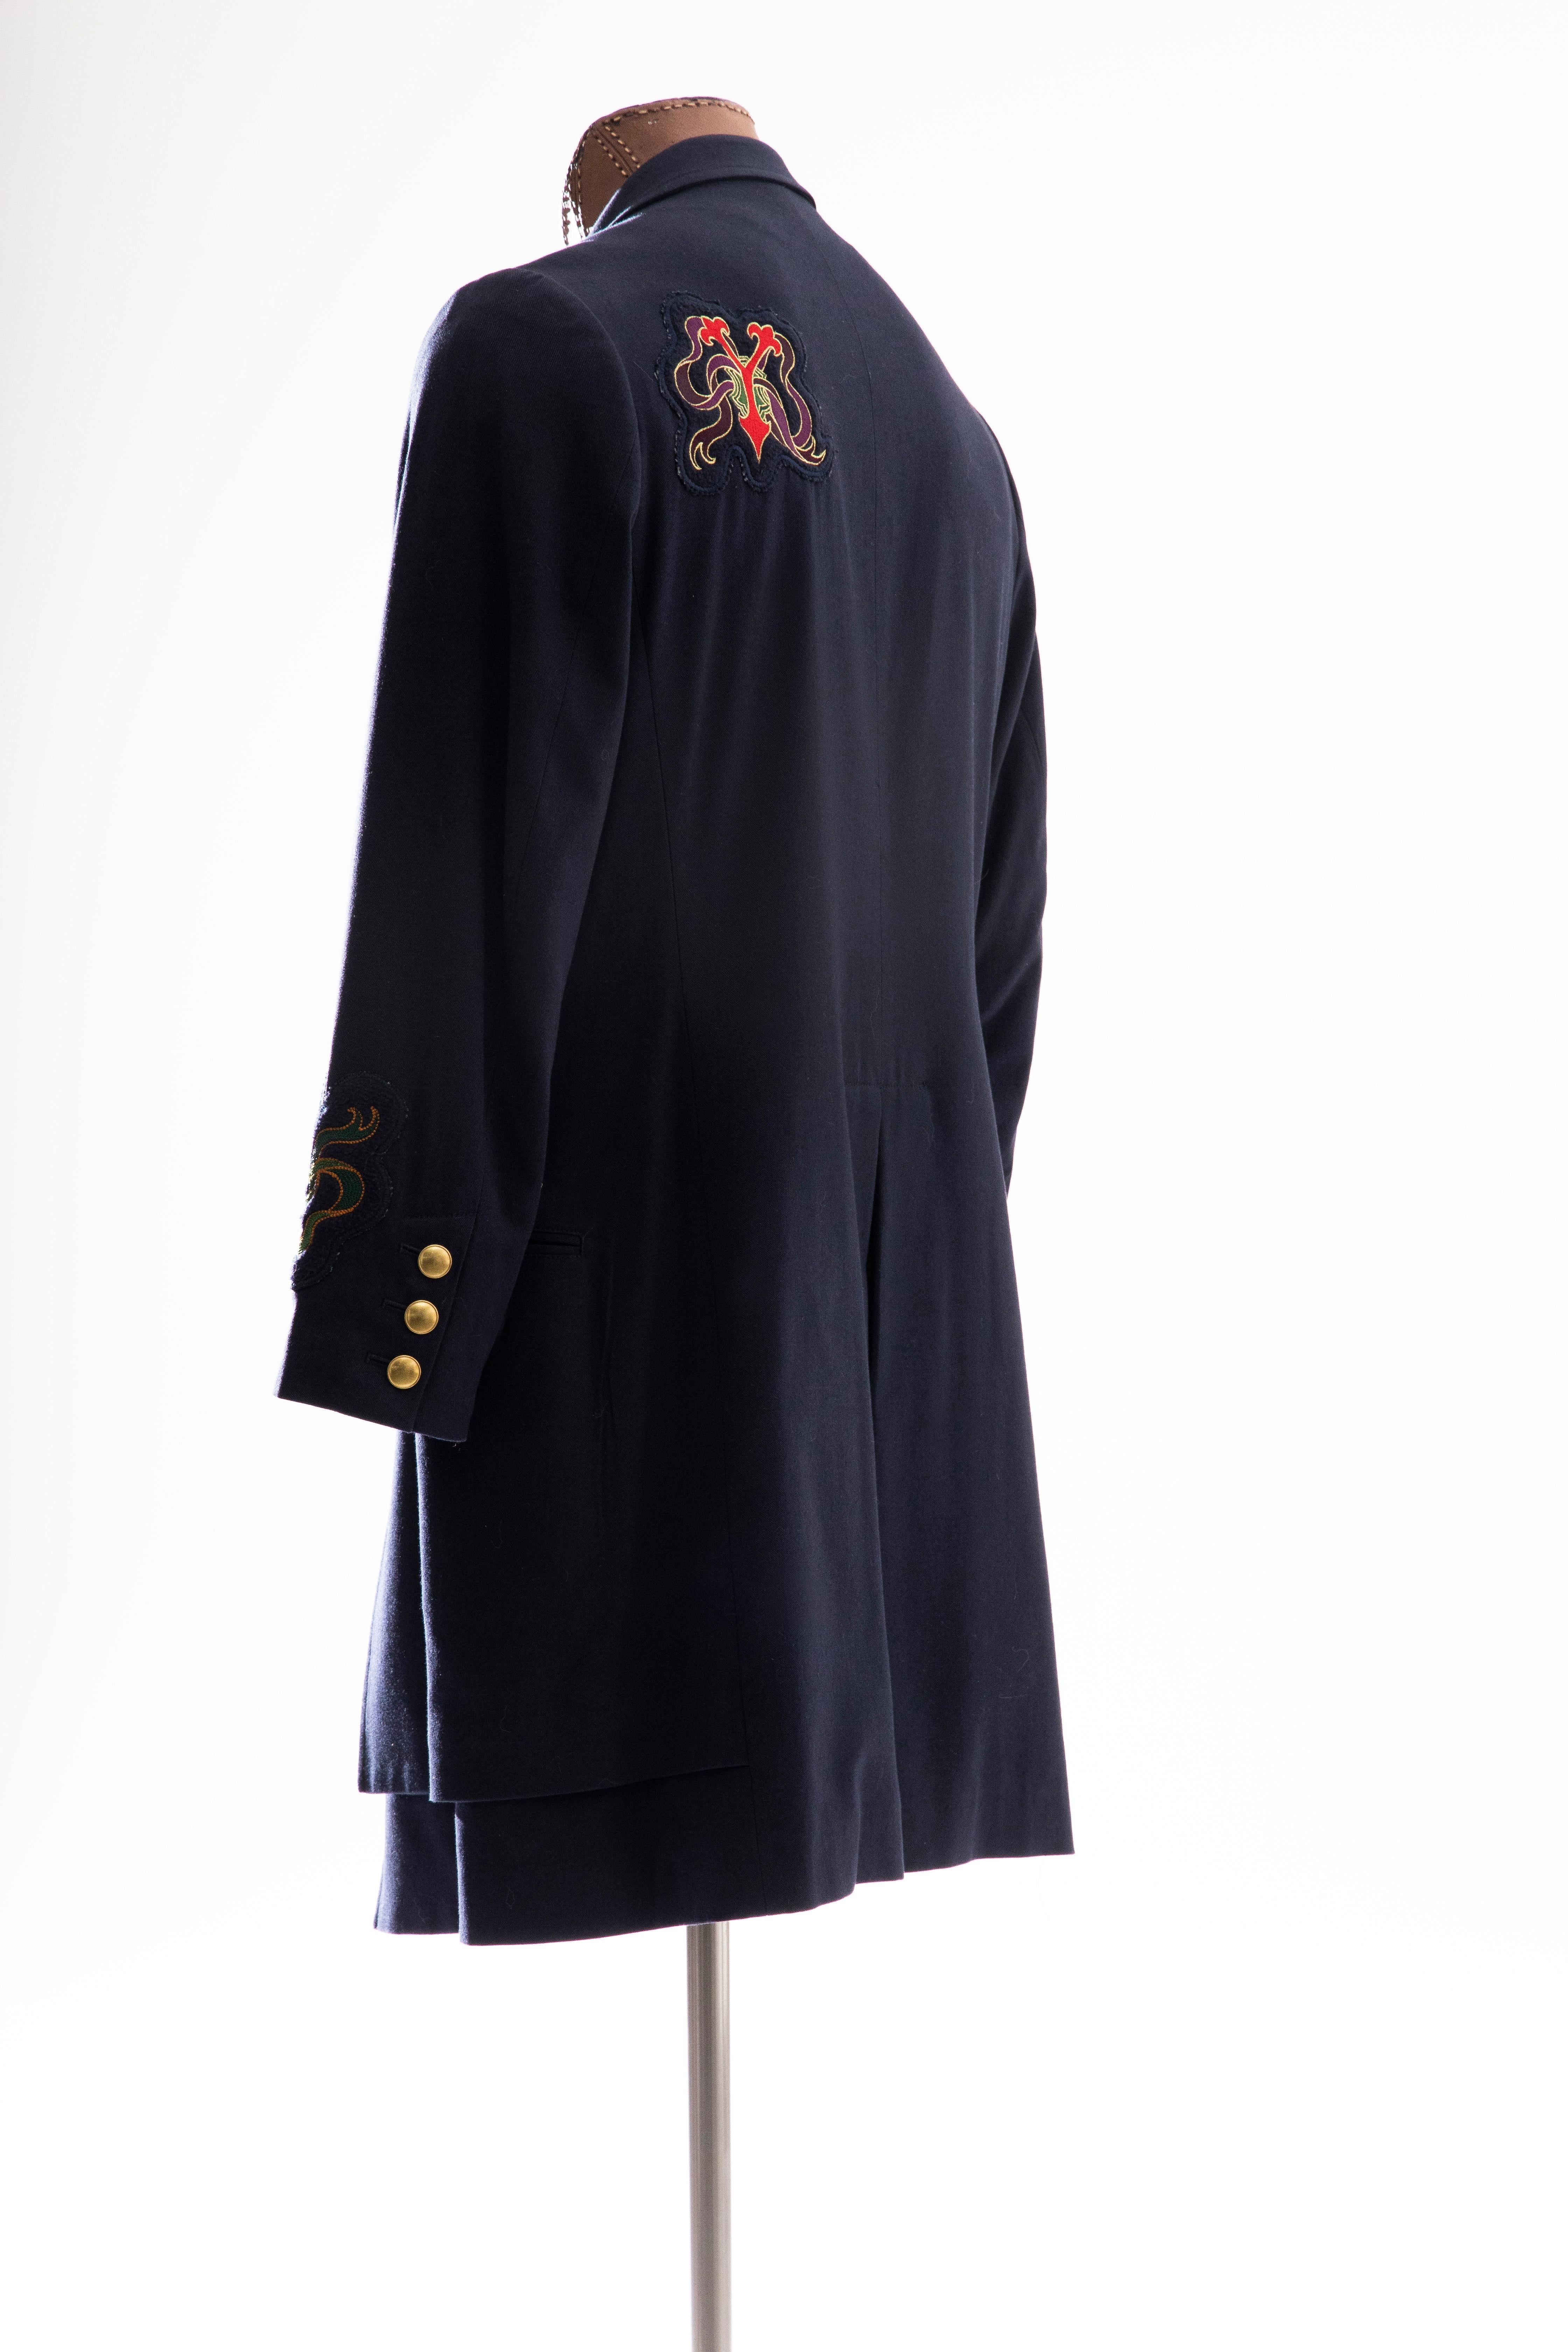 Yohji Yamamoto Pour Homme Cotton Wool Navy Coat Embroidered Patches, Fall 2012 For Sale 1